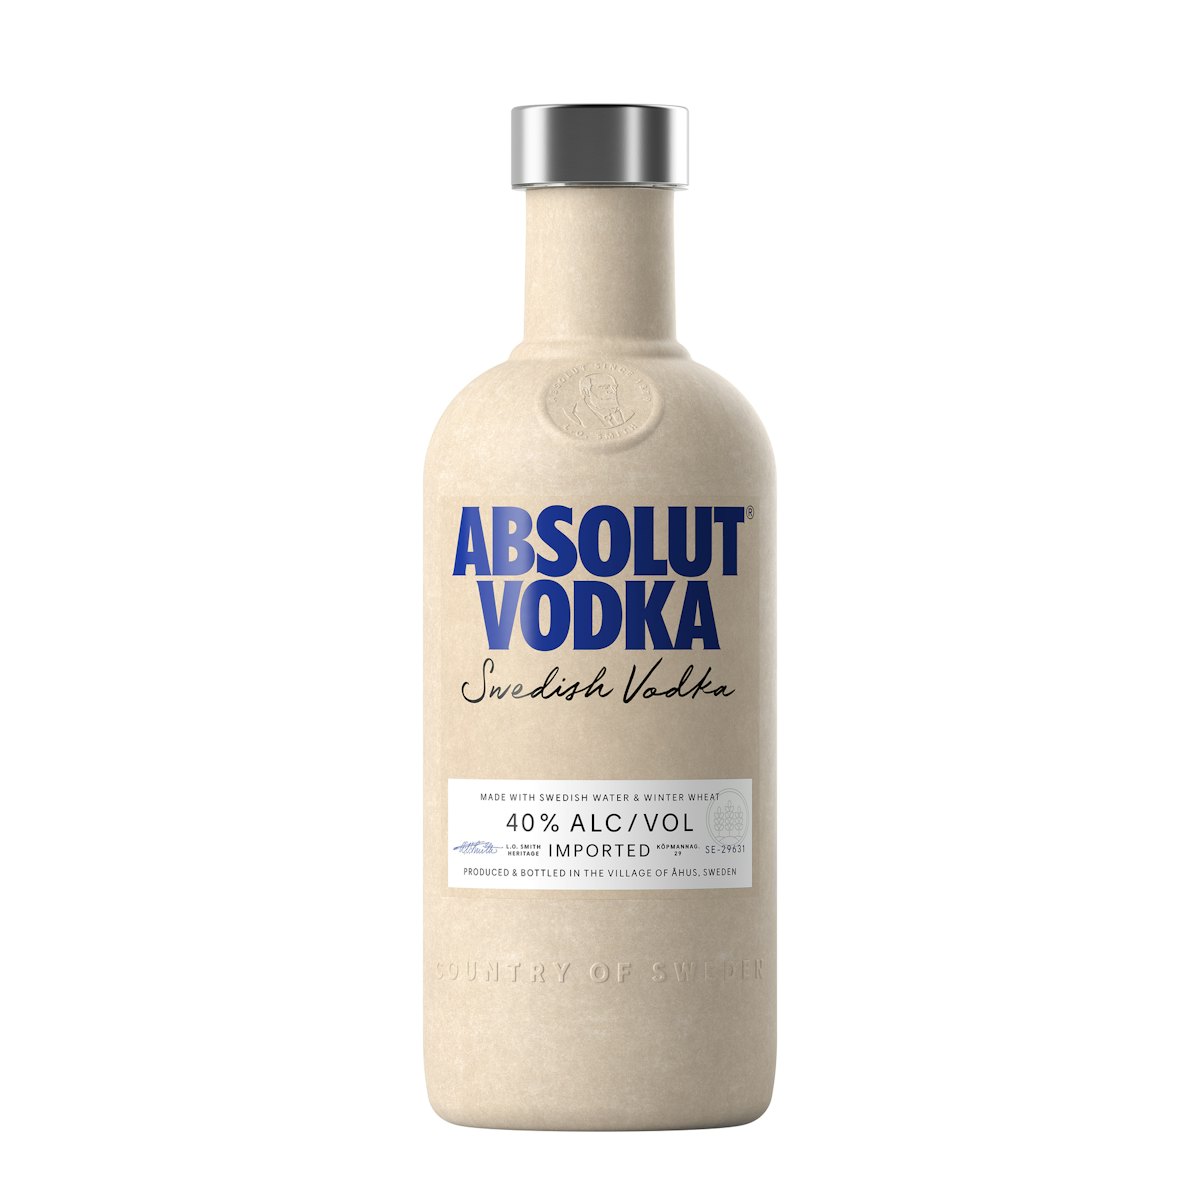 Absolut. Cocktails: Absolut Vodka Drinks For Every Occasion